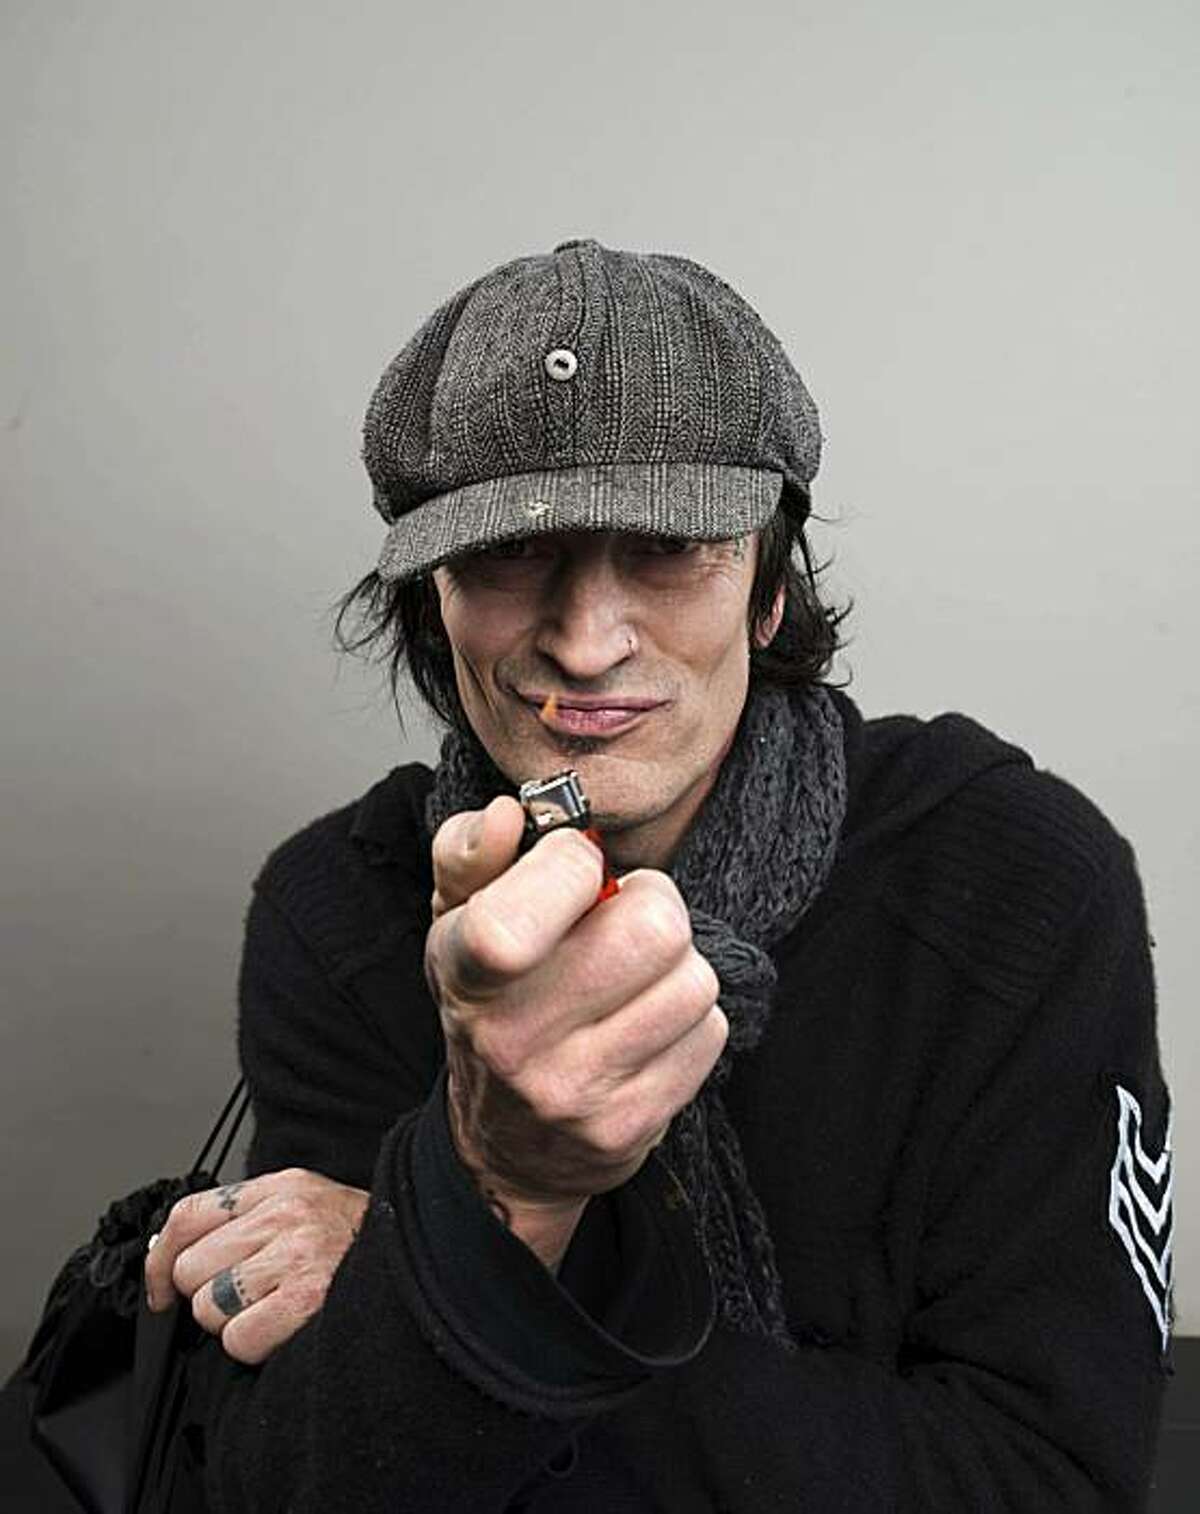 Motley Crue rocker Tommy Lee turns 50 today, Wednesday, October 3, 2012. Here he poses for a portrait last year.